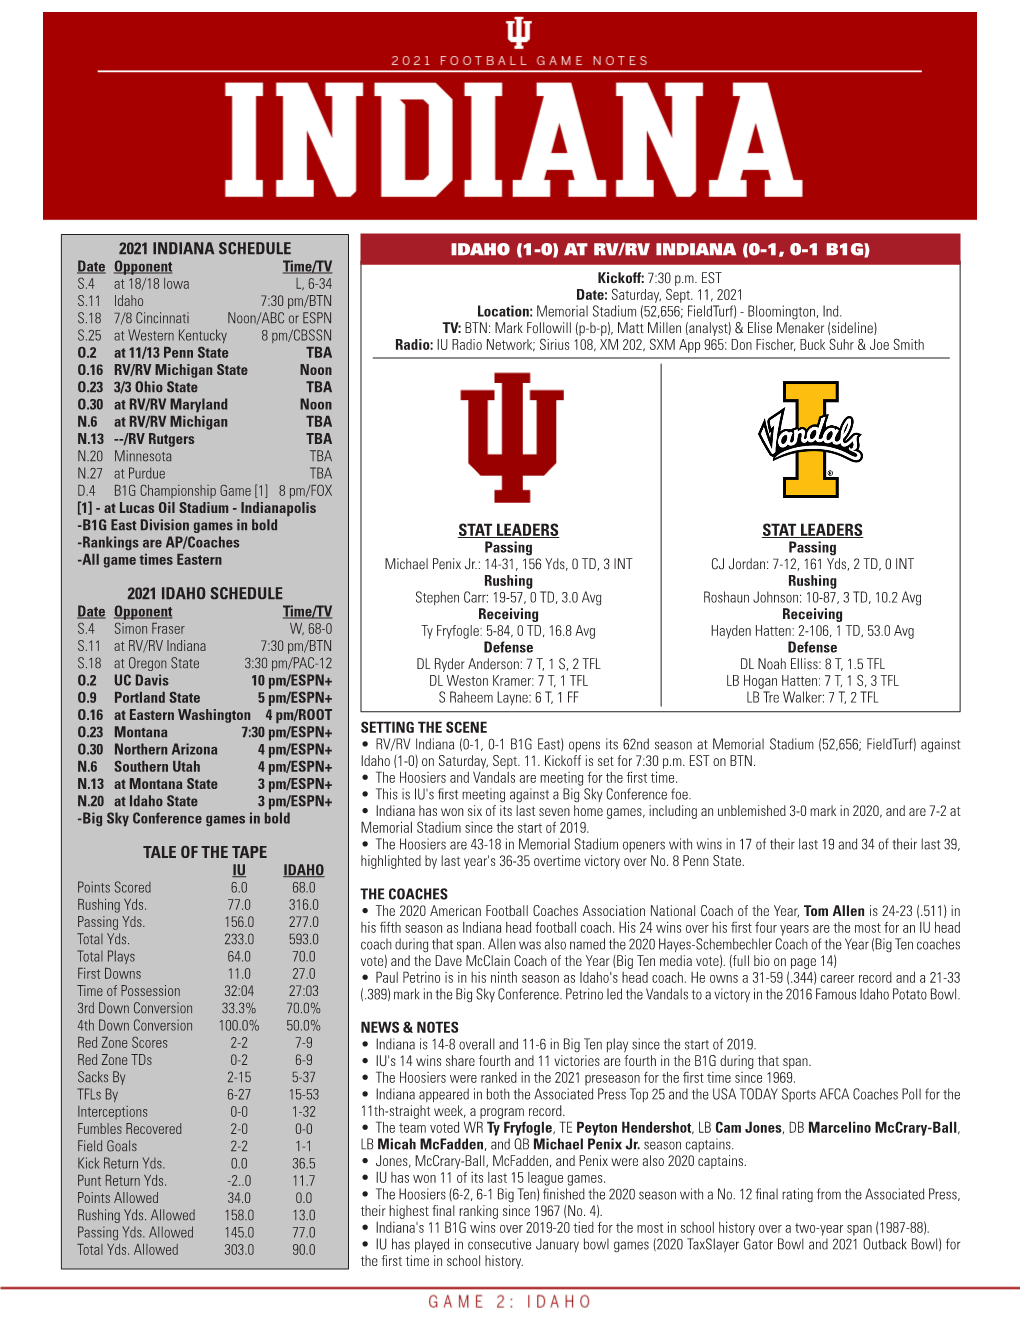 2021 Indiana Schedule 2021 Idaho Schedule Tale of the Tape Stat Leaders Stat Leaders Idaho (1-0) at Rv/Rv Indiana (0-1, 0-1 B1g)